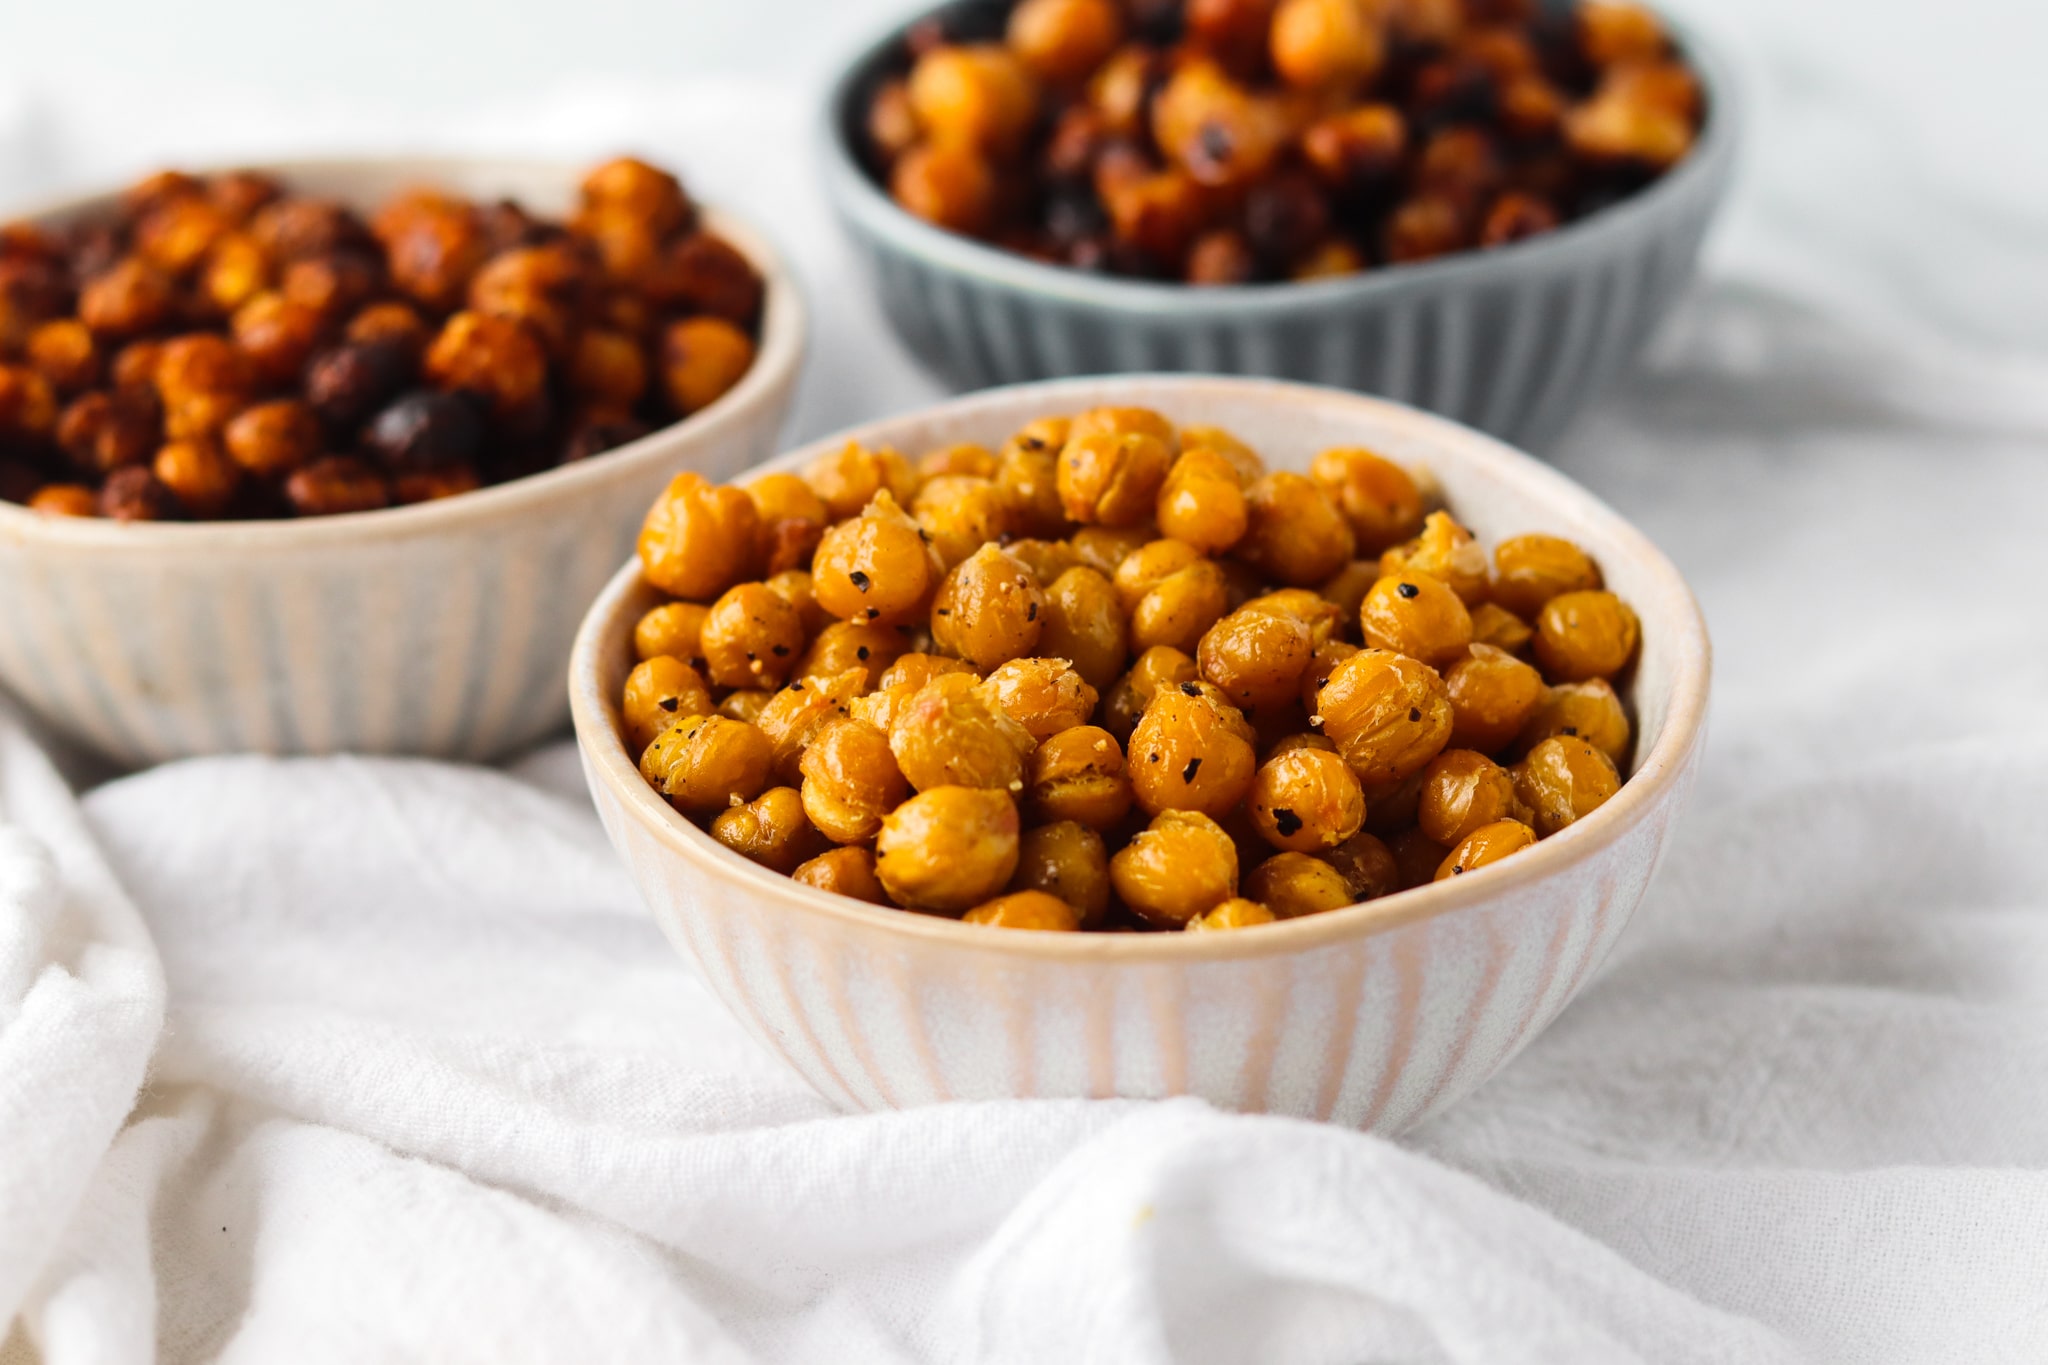 high protein meals and snacks crunchy chickpeas recipe